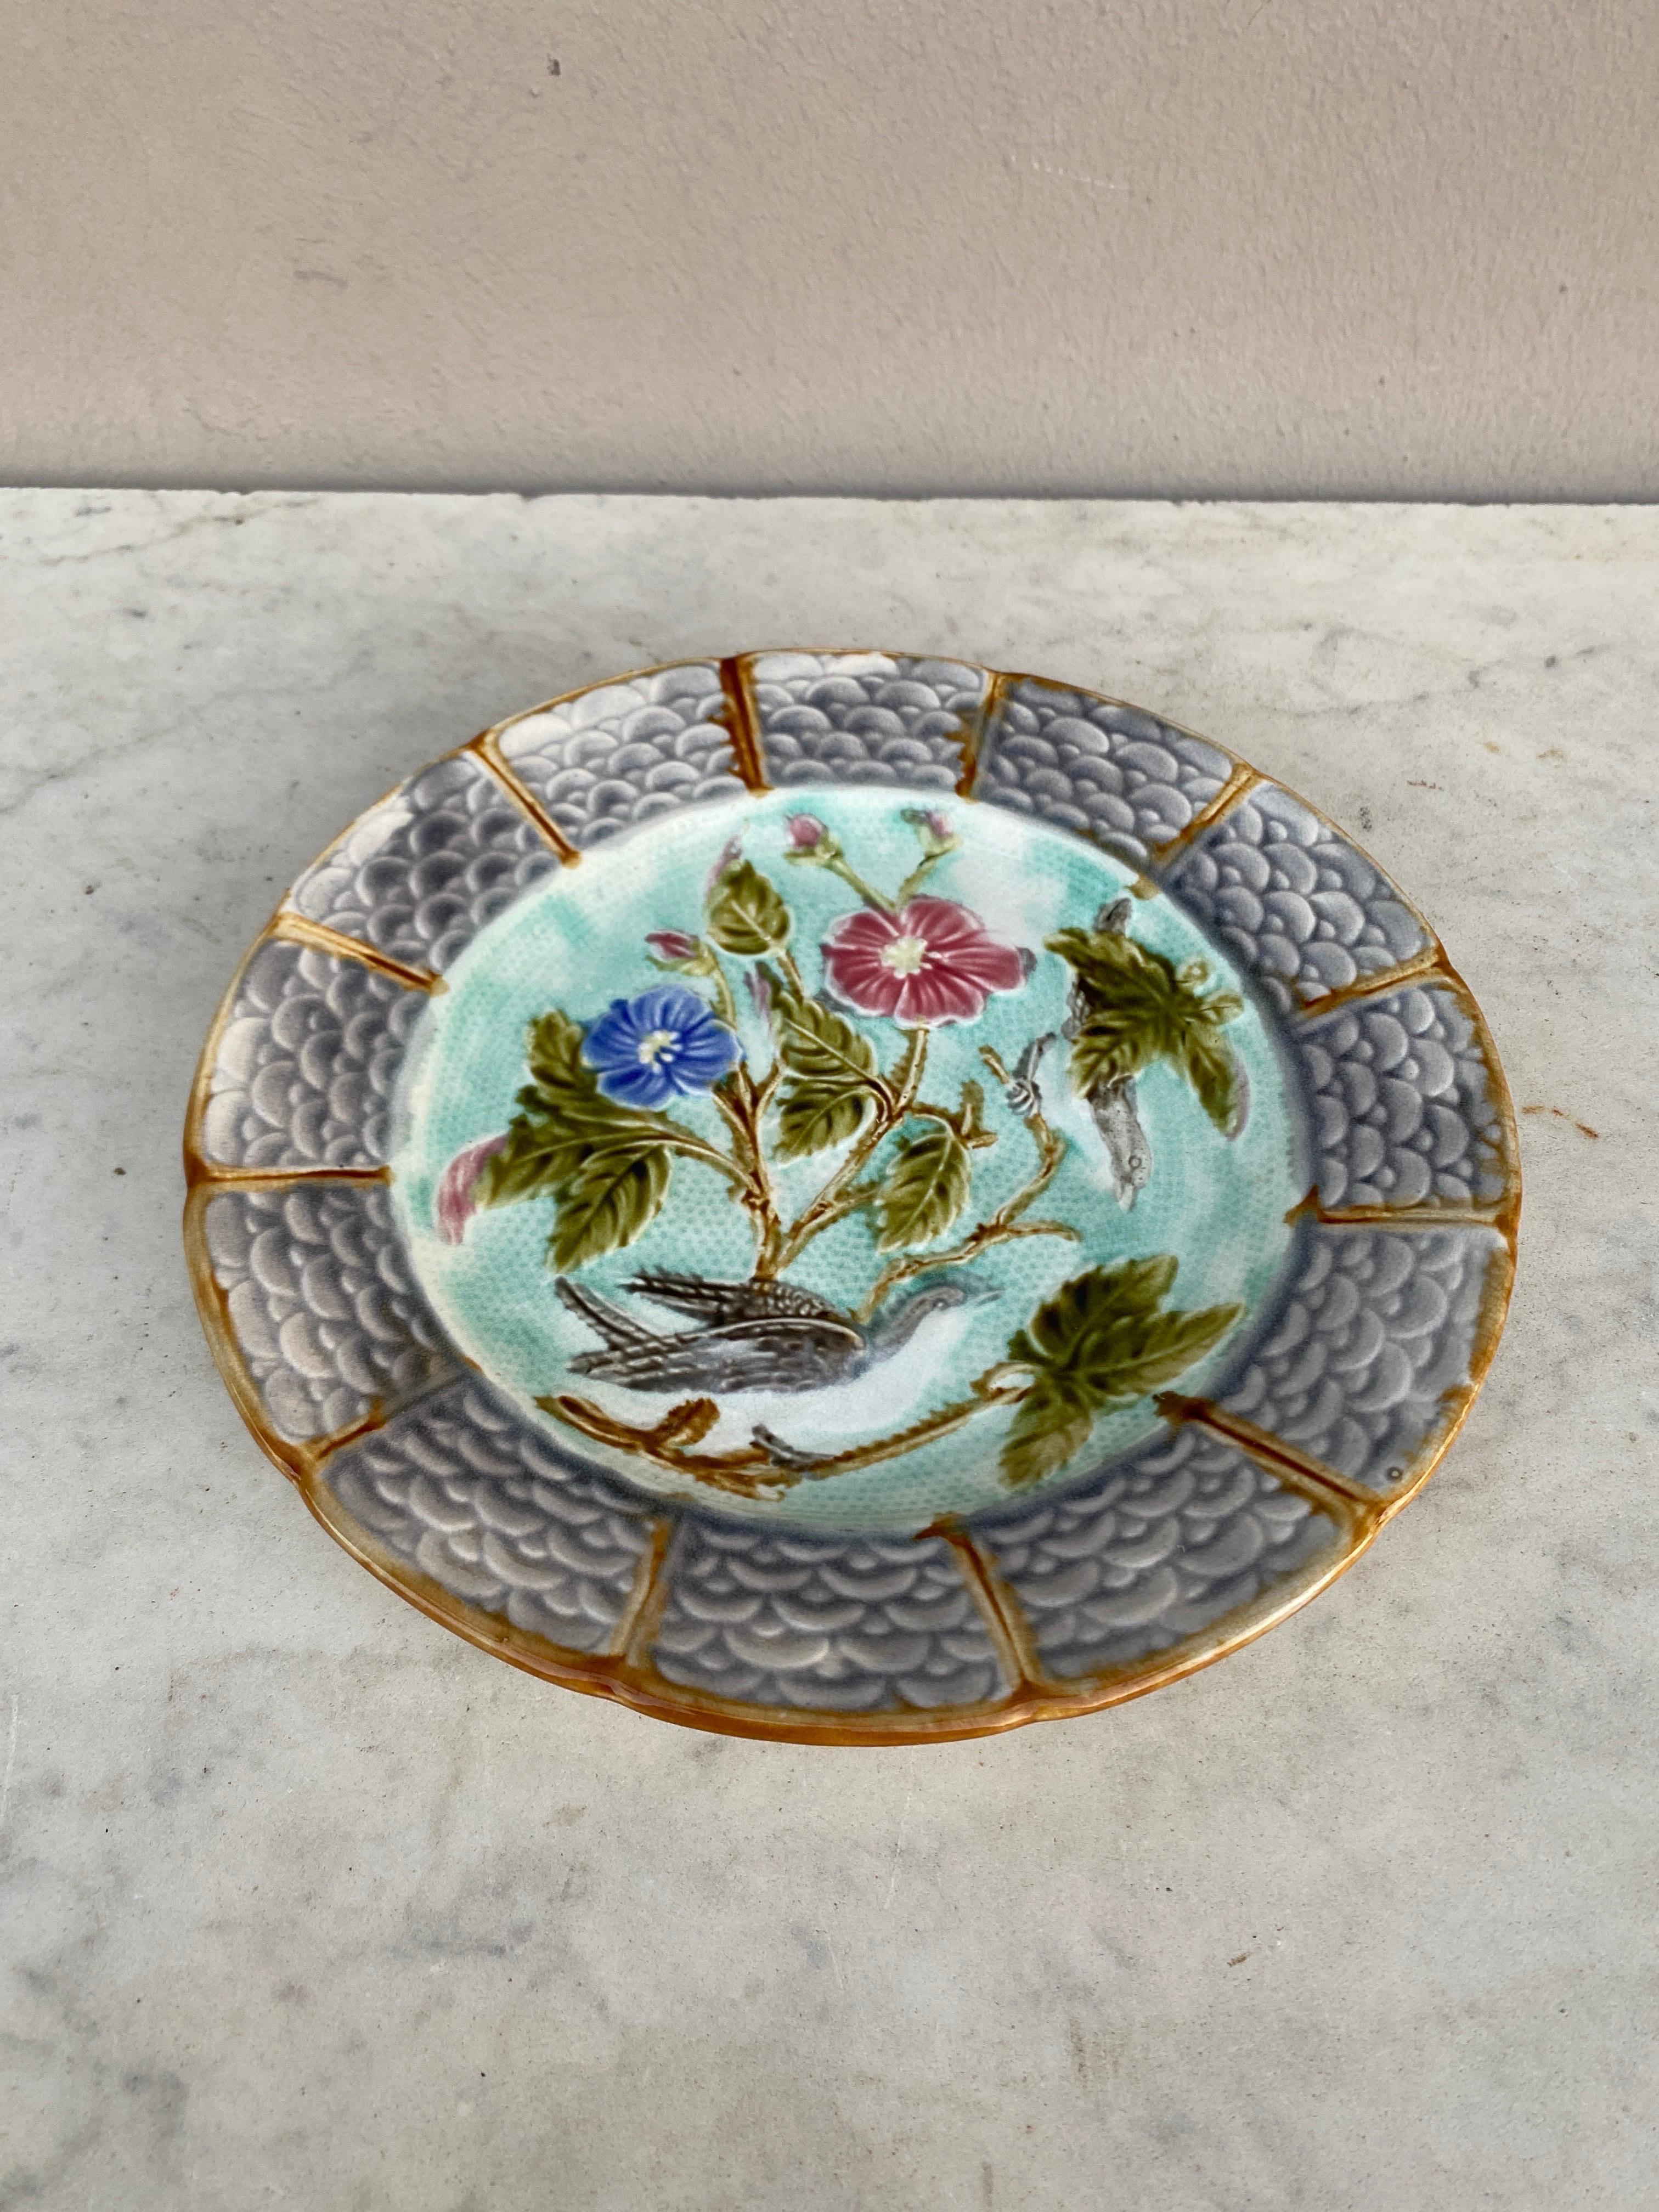 French Majolica bird plate signed Nimy Les Mons, circa 1890.